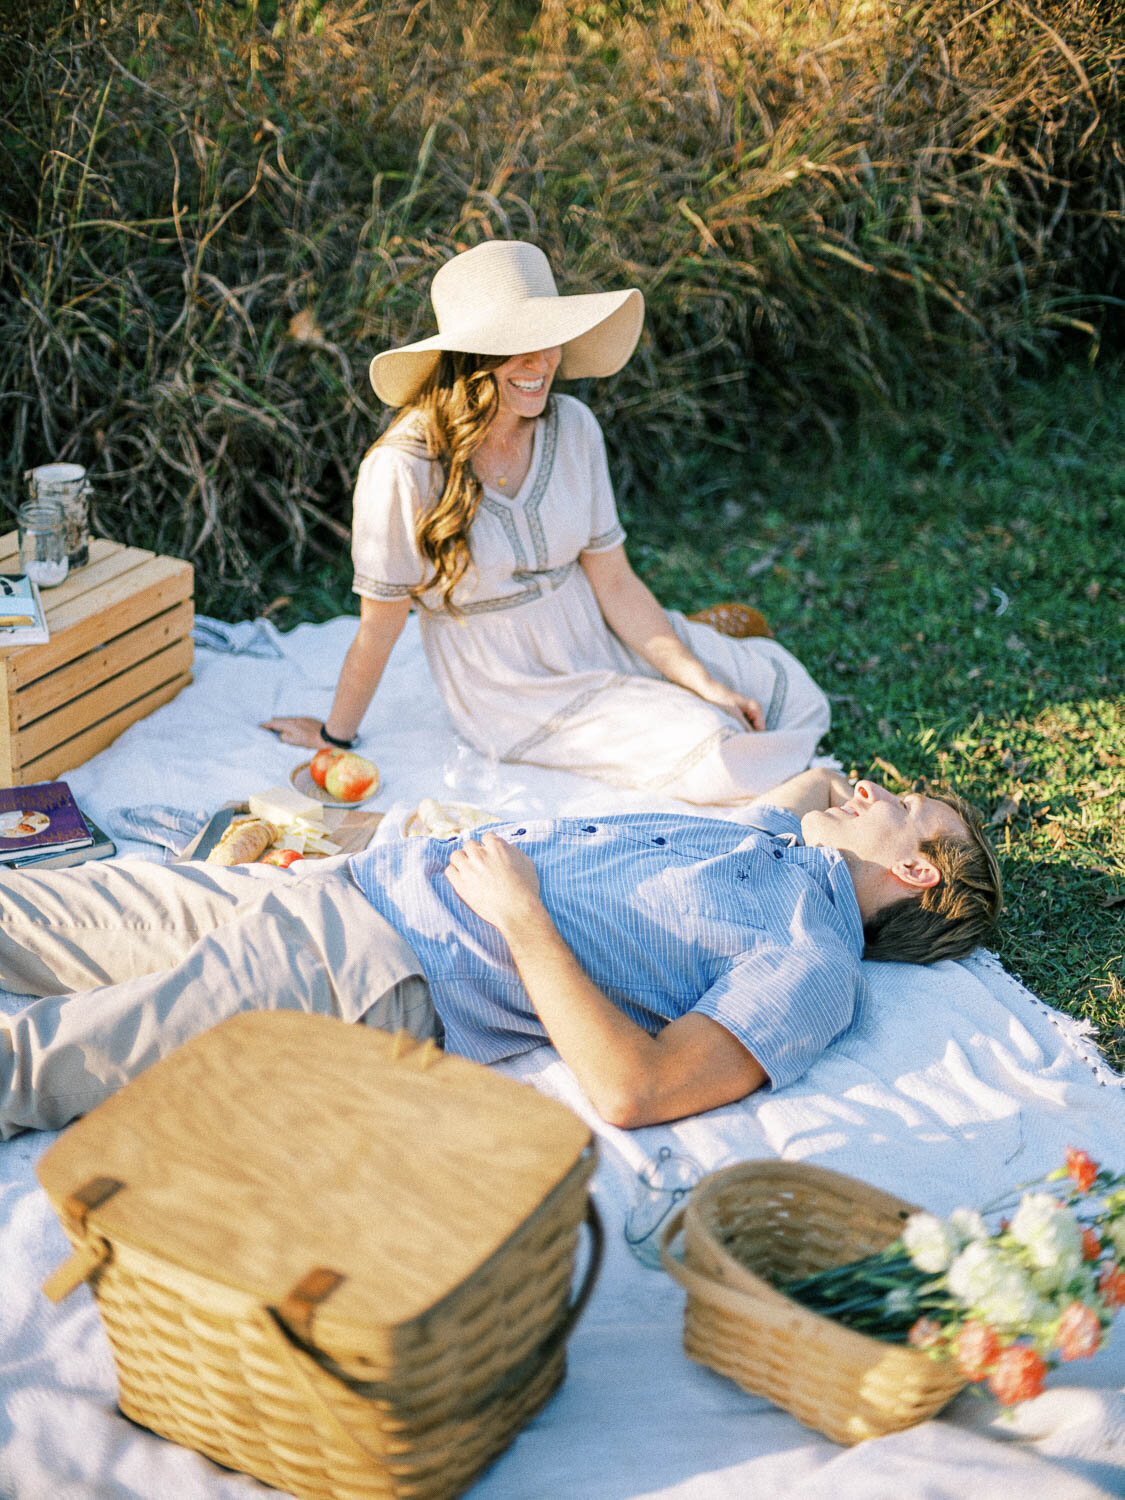 engaged-man-and-woman-sit-across-from-each-other-on-white-picnic-blanket-for-their-fall-engagement-session-in-virginia.jpg